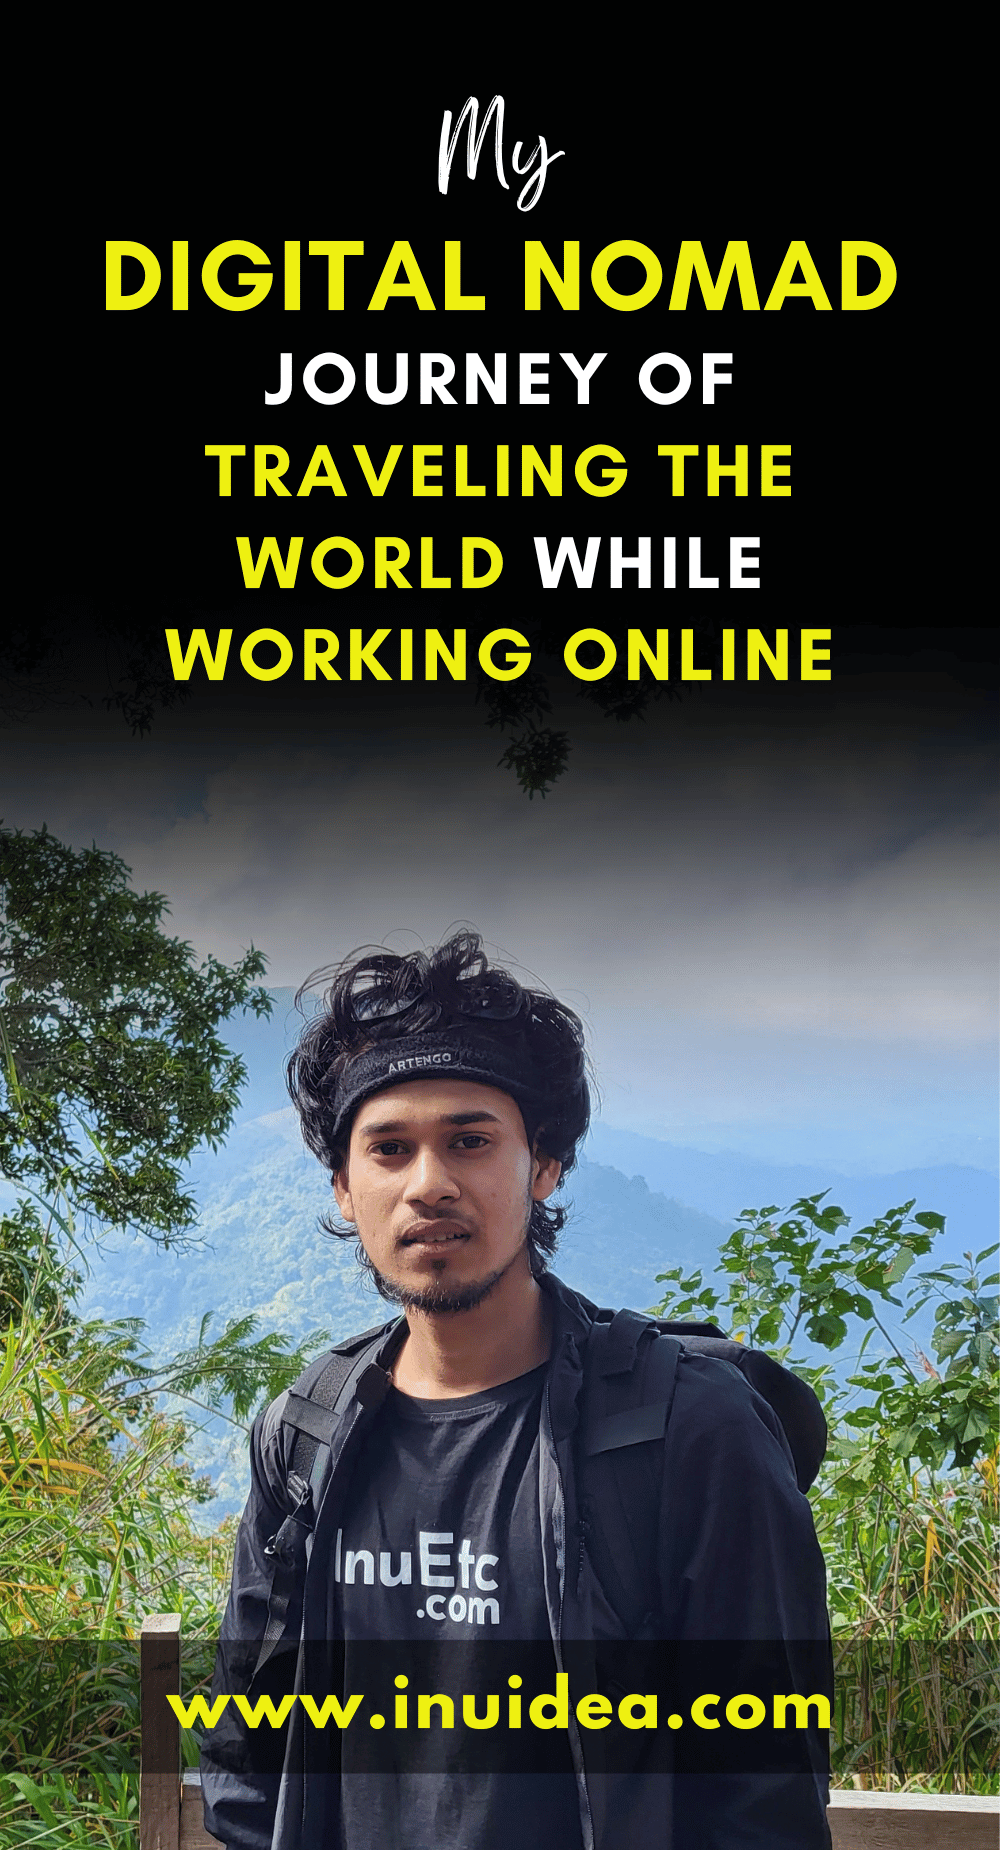 My Digital Nomad Journey of Traveling the World While Working Online